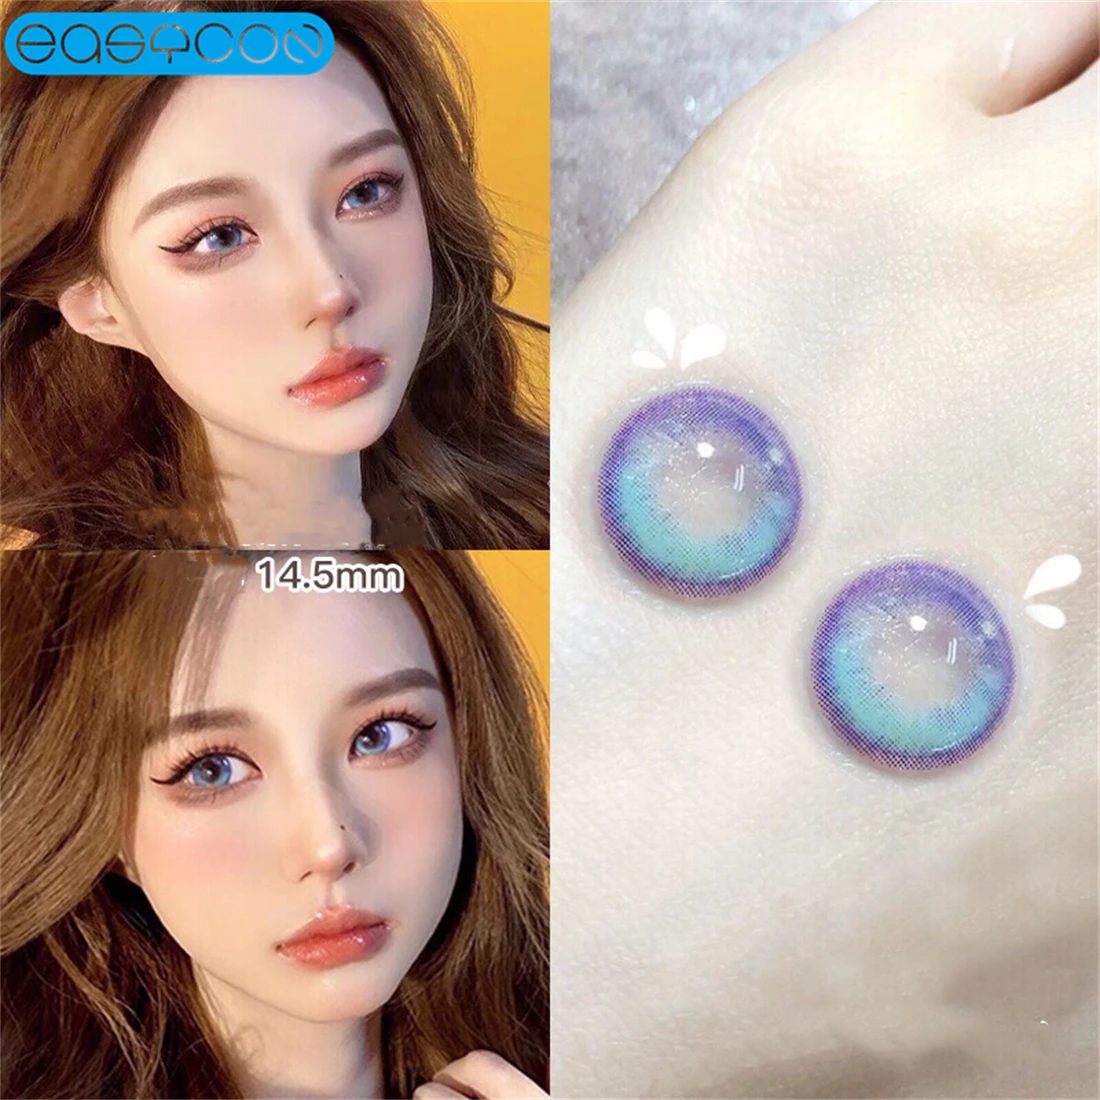 

Tears Blue Colored Contact Lenses Soft For Eyes Big Beauty Pupil Myopia Prescription Degrees Yearly Natural Make Up New